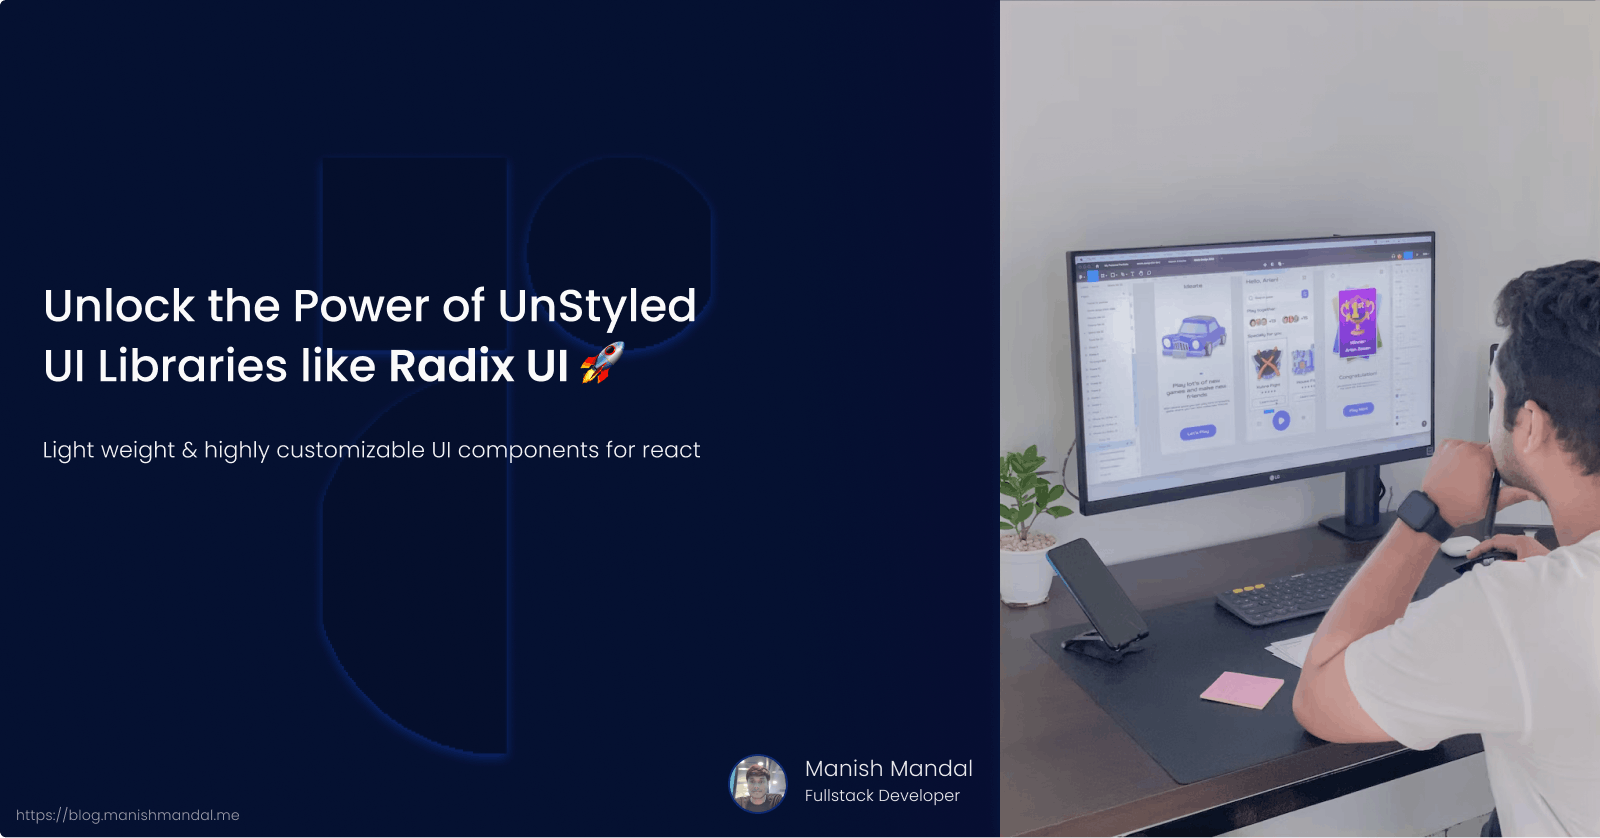 Unlock the Power of Unstyled UI Library Solutions like Radix UI